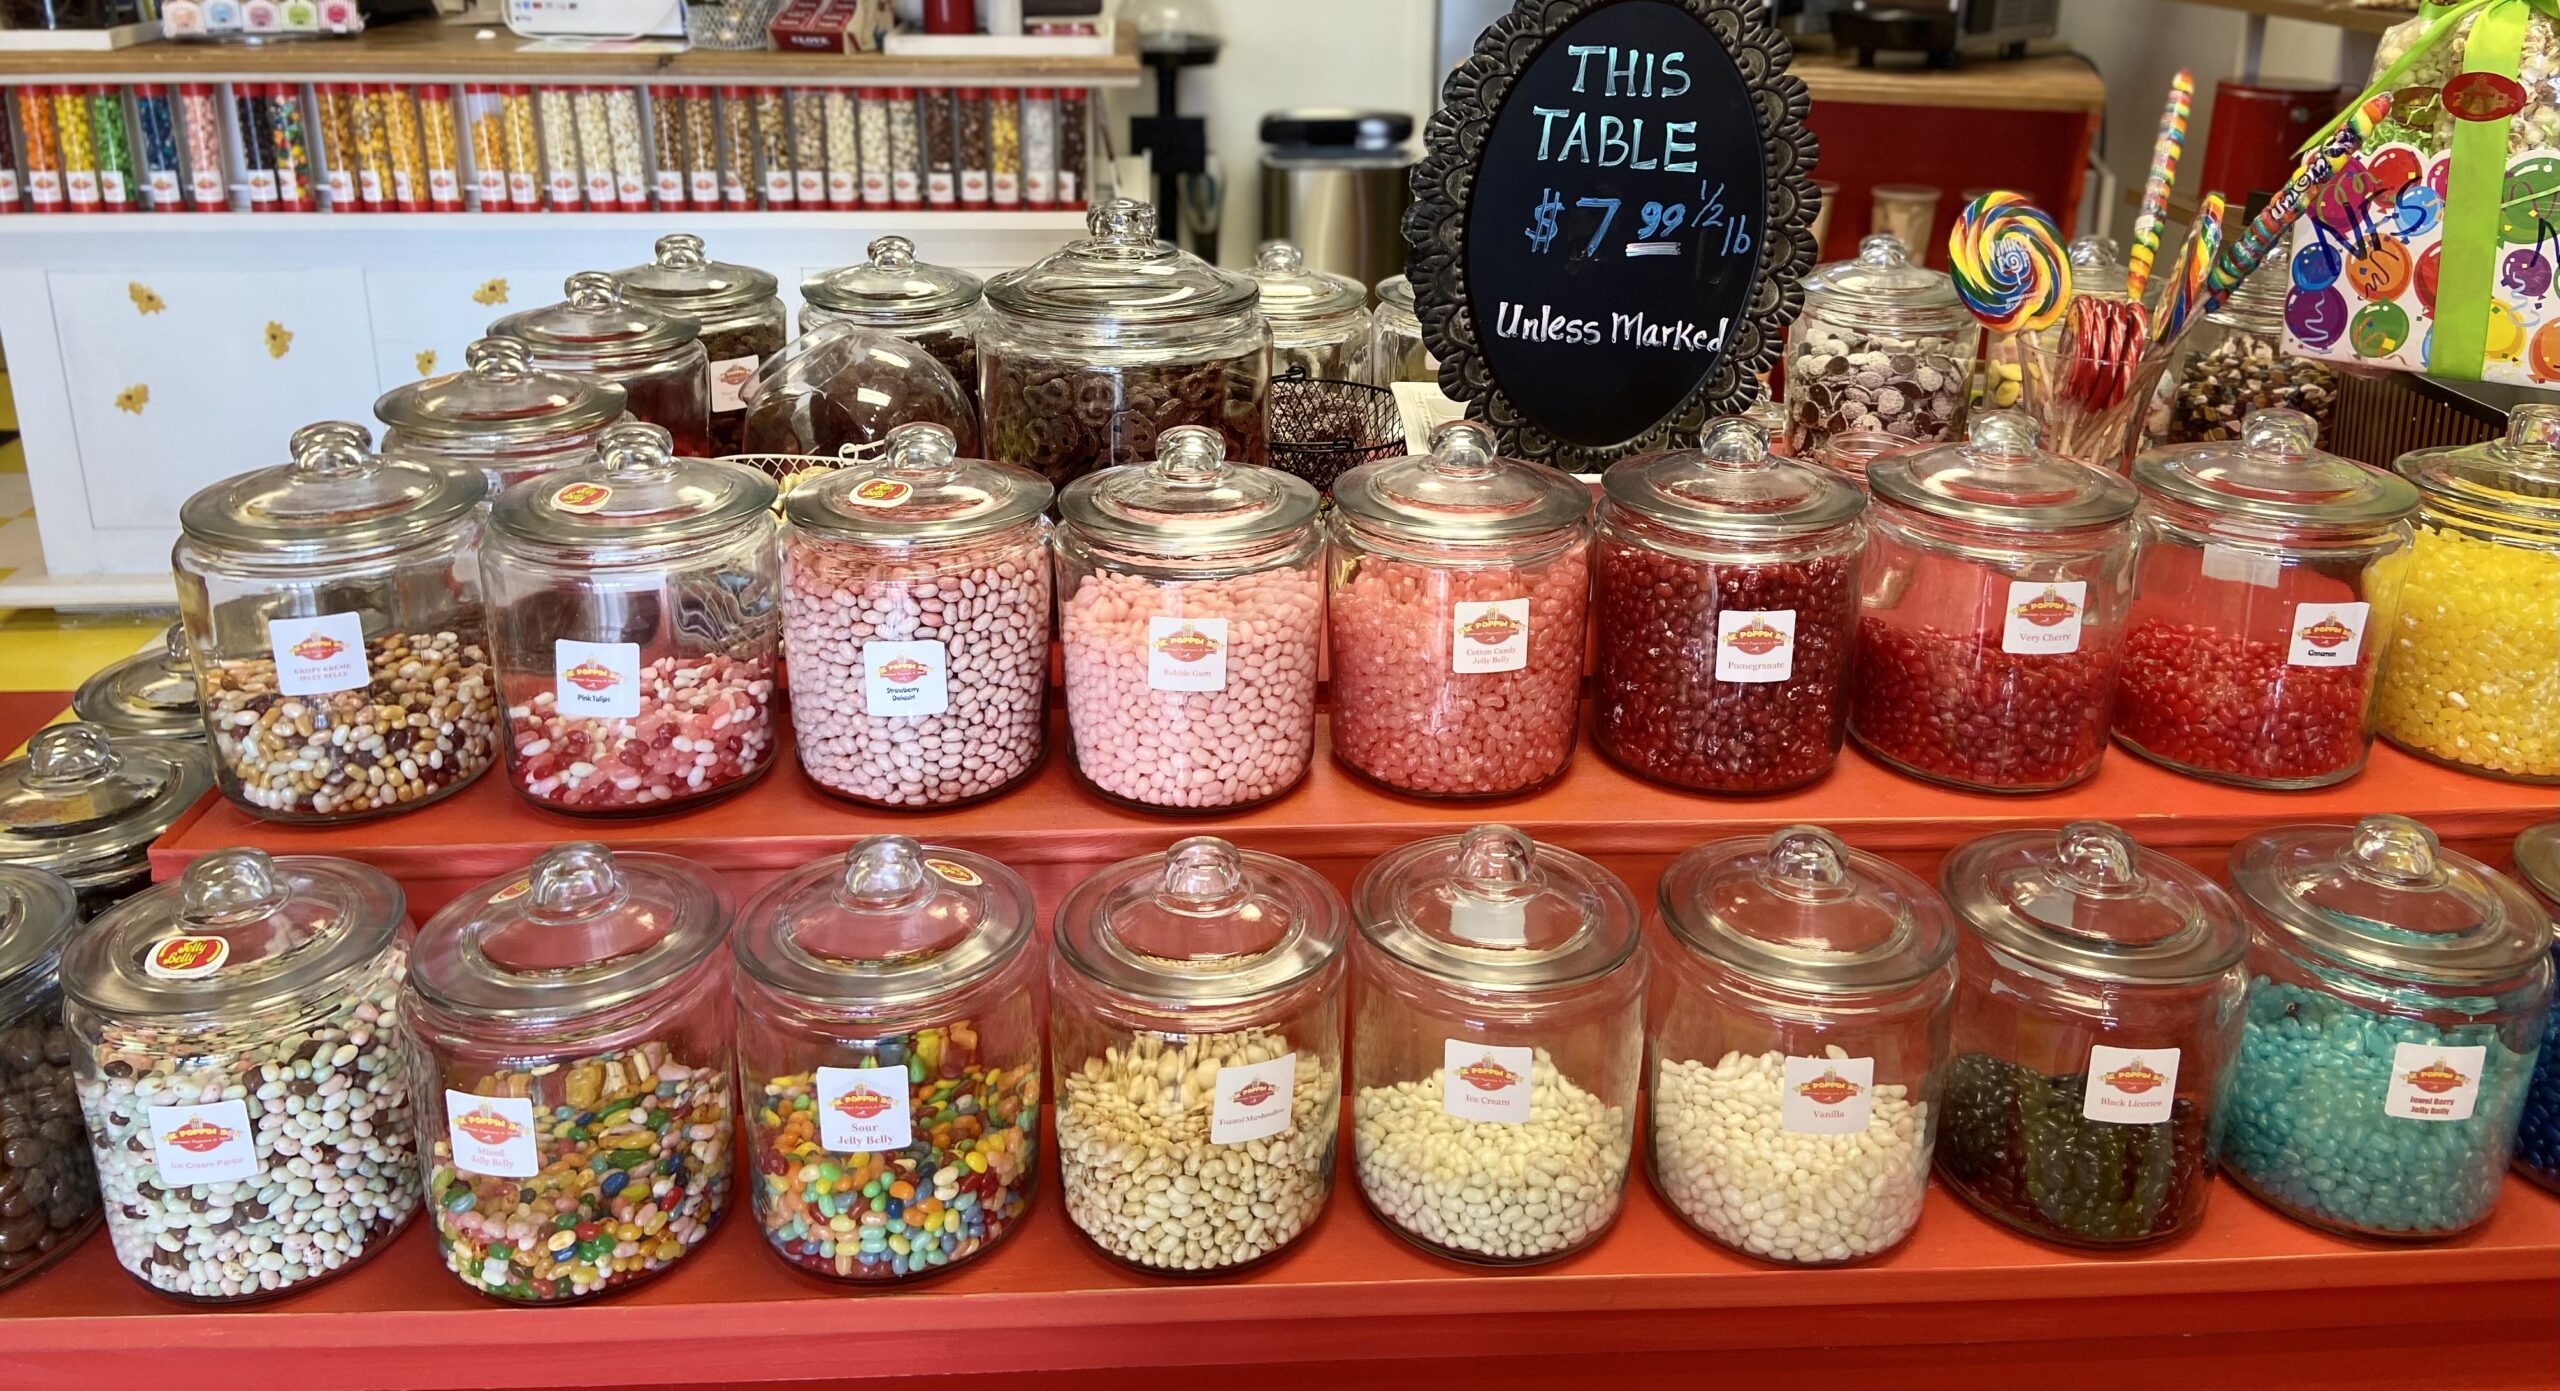 https://www.thepoppinbox.com/wp-content/uploads/2022/05/Candy-By-The-Pound-3-scaled.jpg